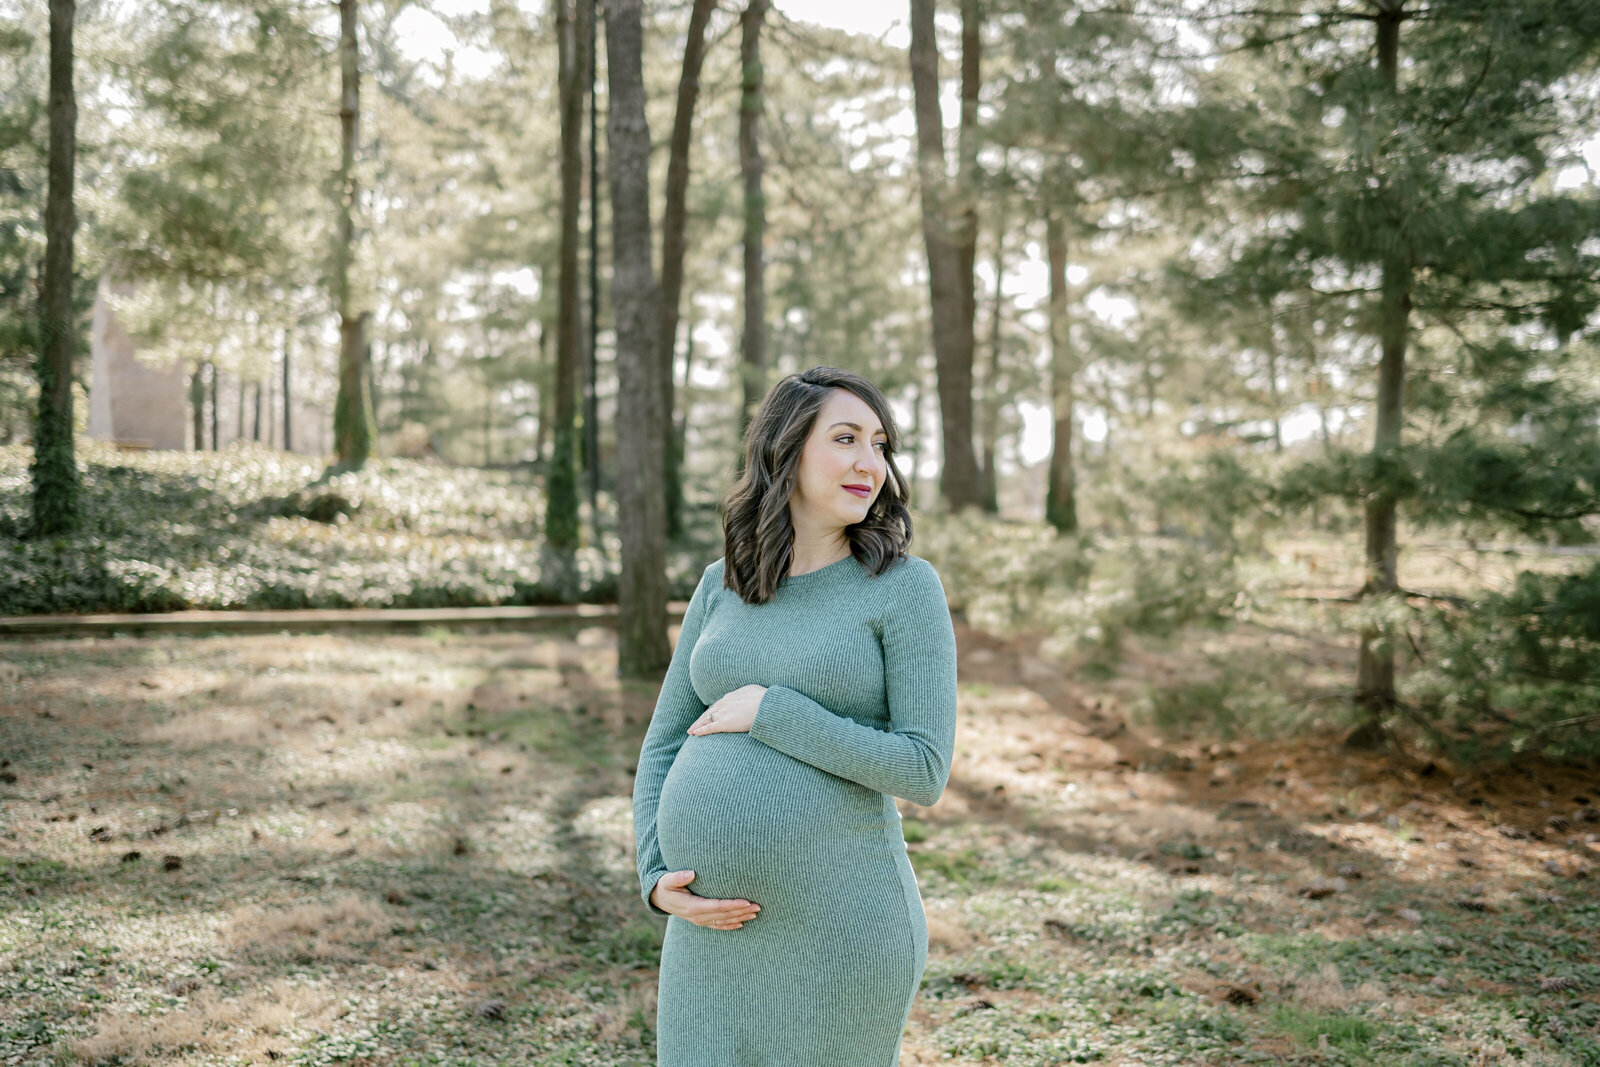 Pregnant woman in field of trees